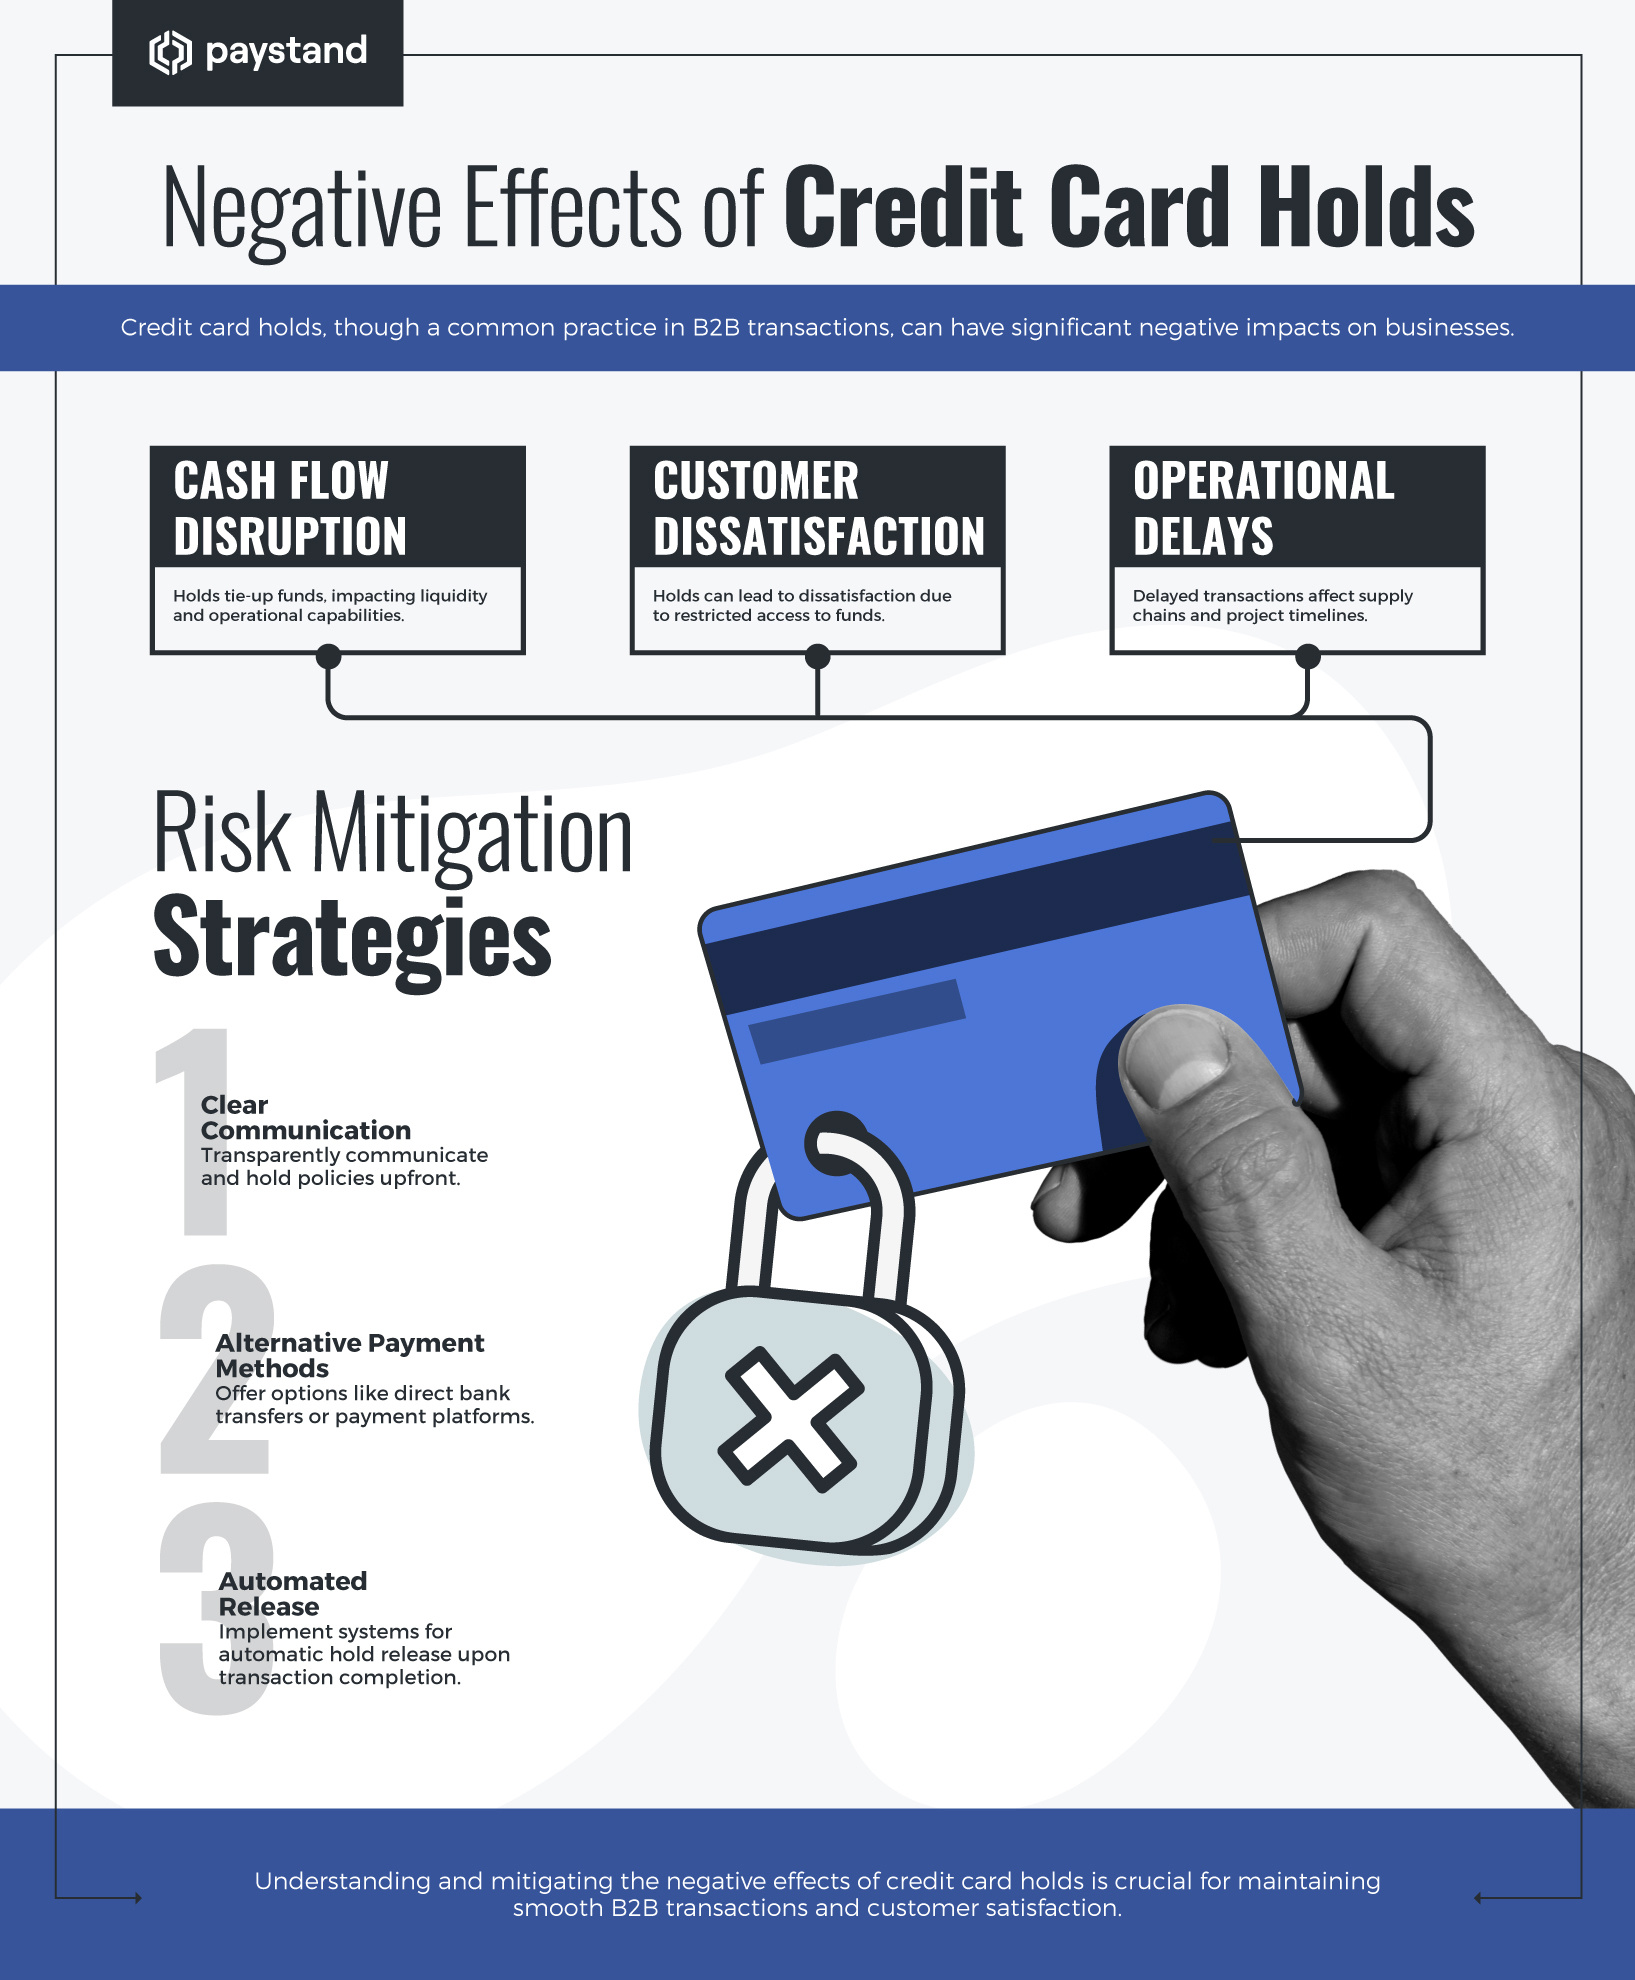 Negative Effects of Credit Card Holds